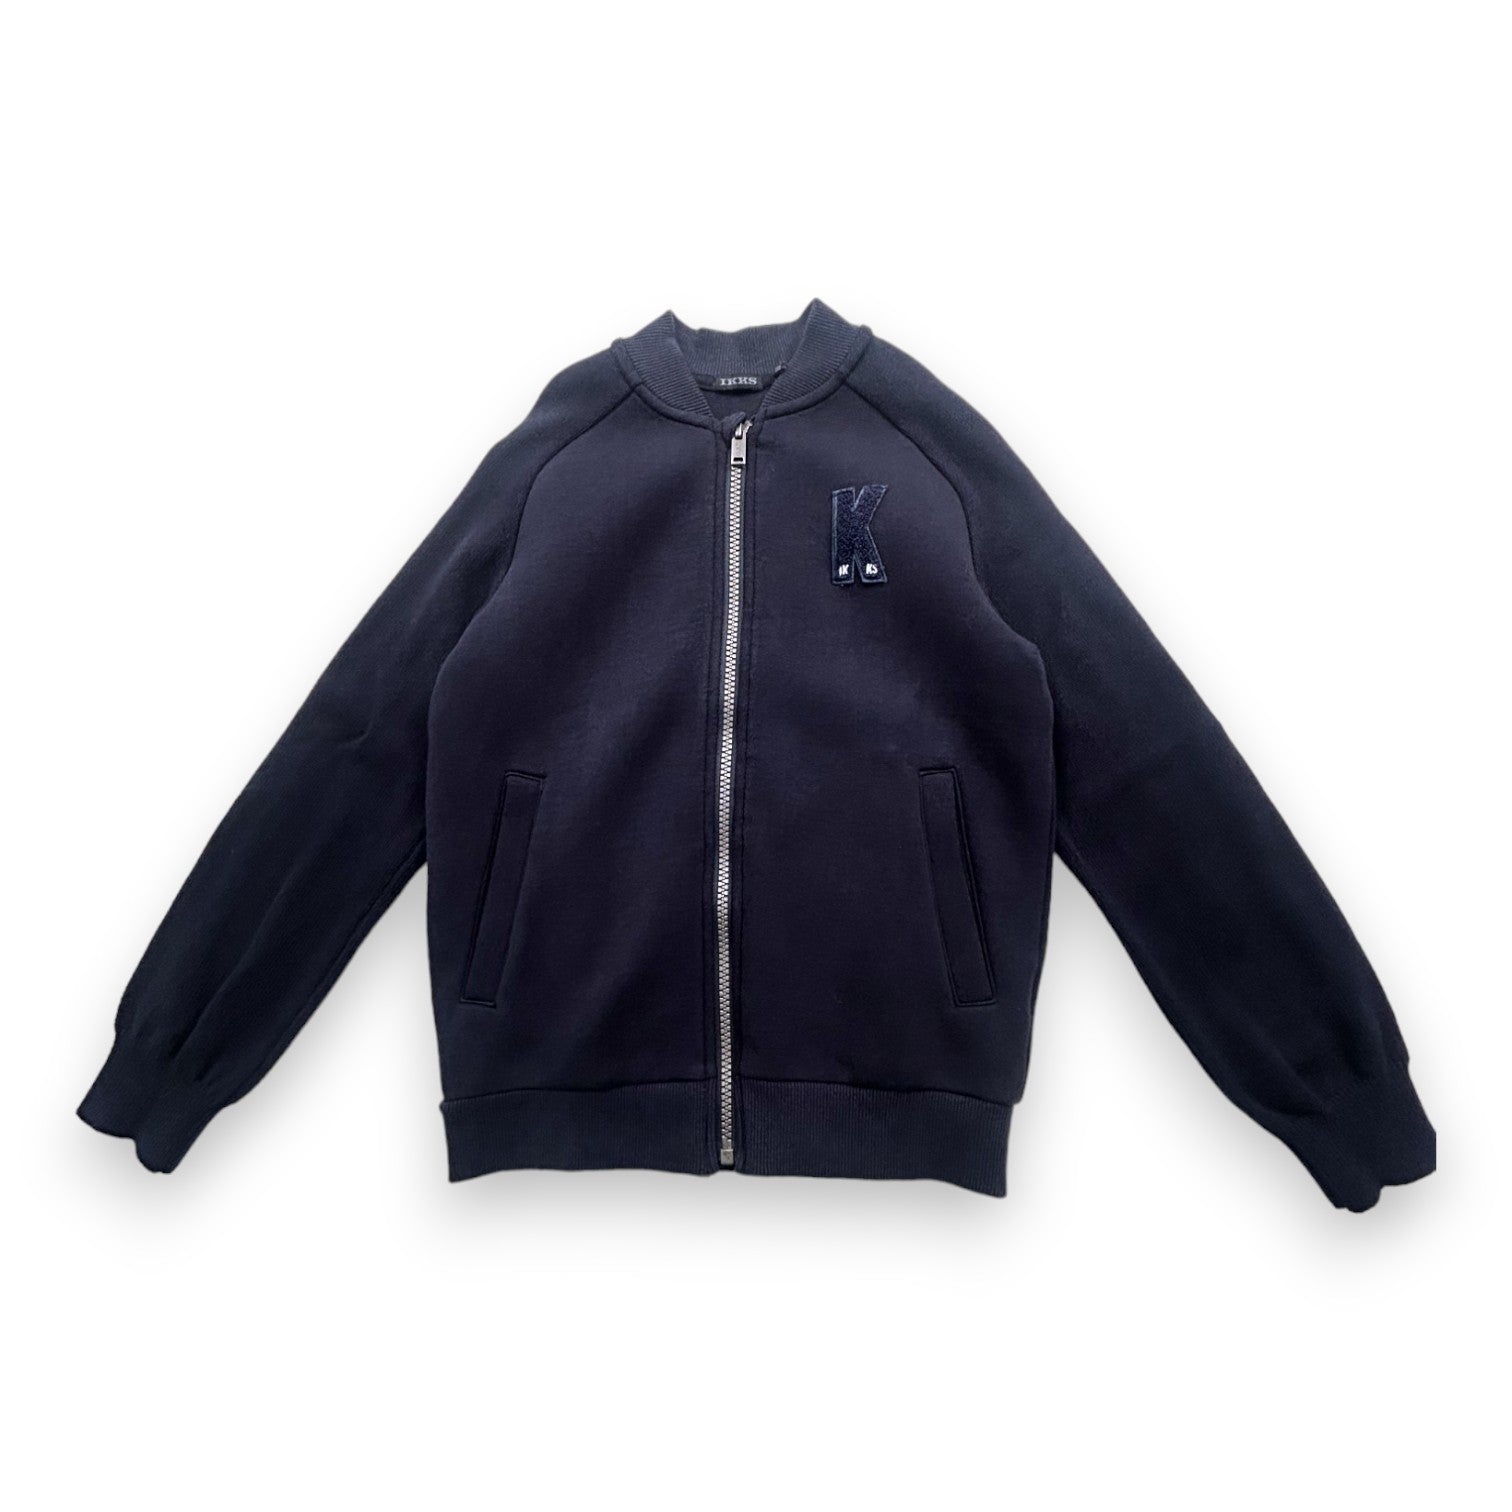 IKKS - Teddy bleu marine manches longues broderie dos - 8 ans